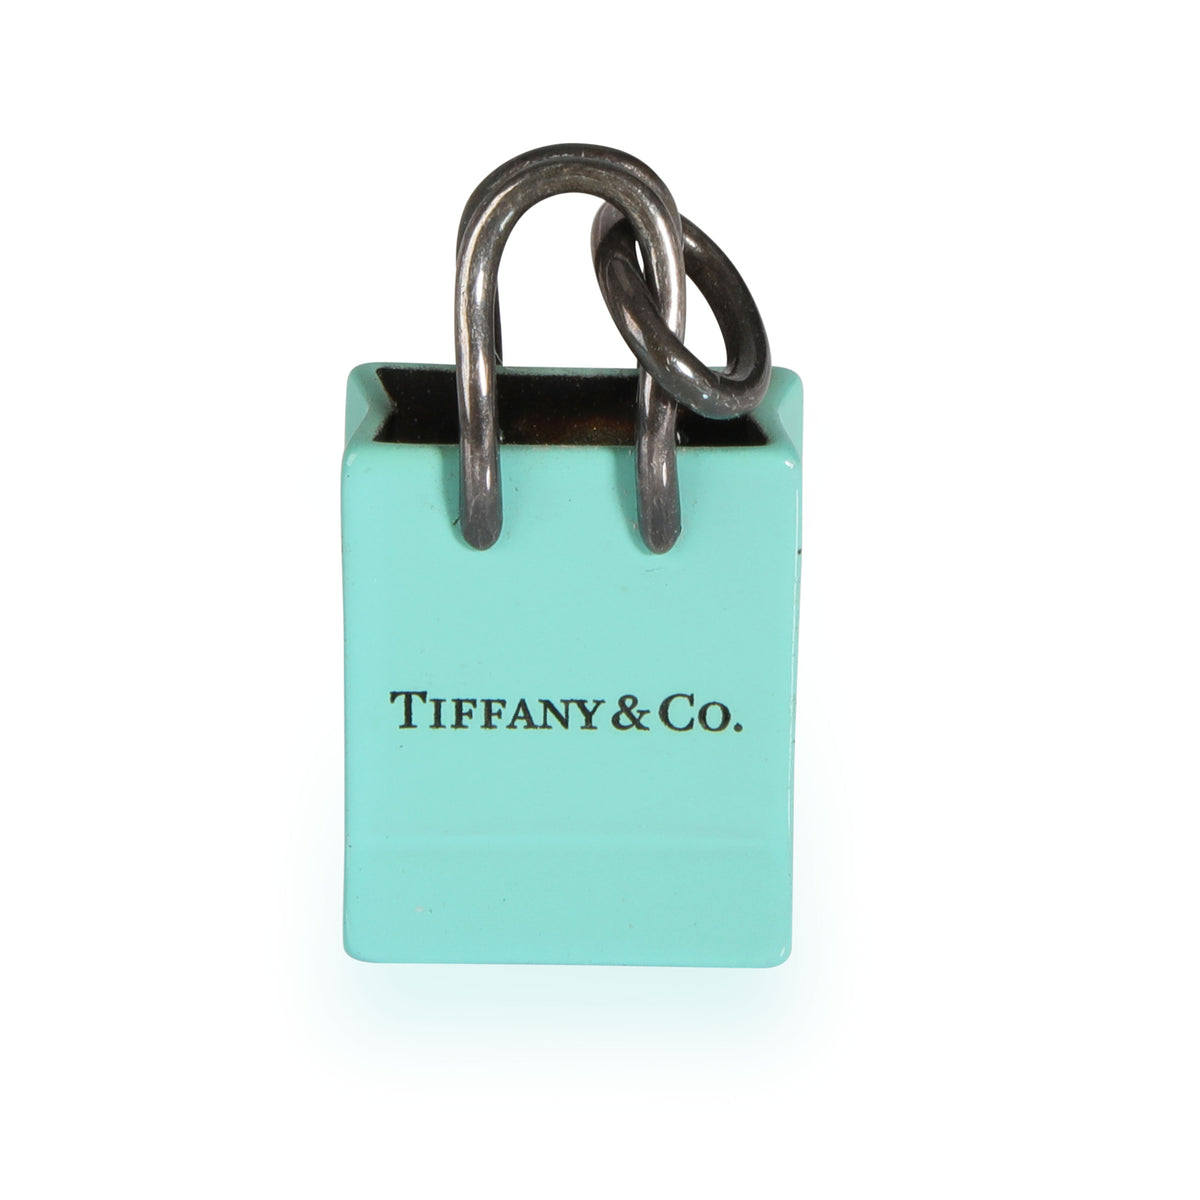 Tiffany & Co. Shopping Bag Charms in  Sterling Silver